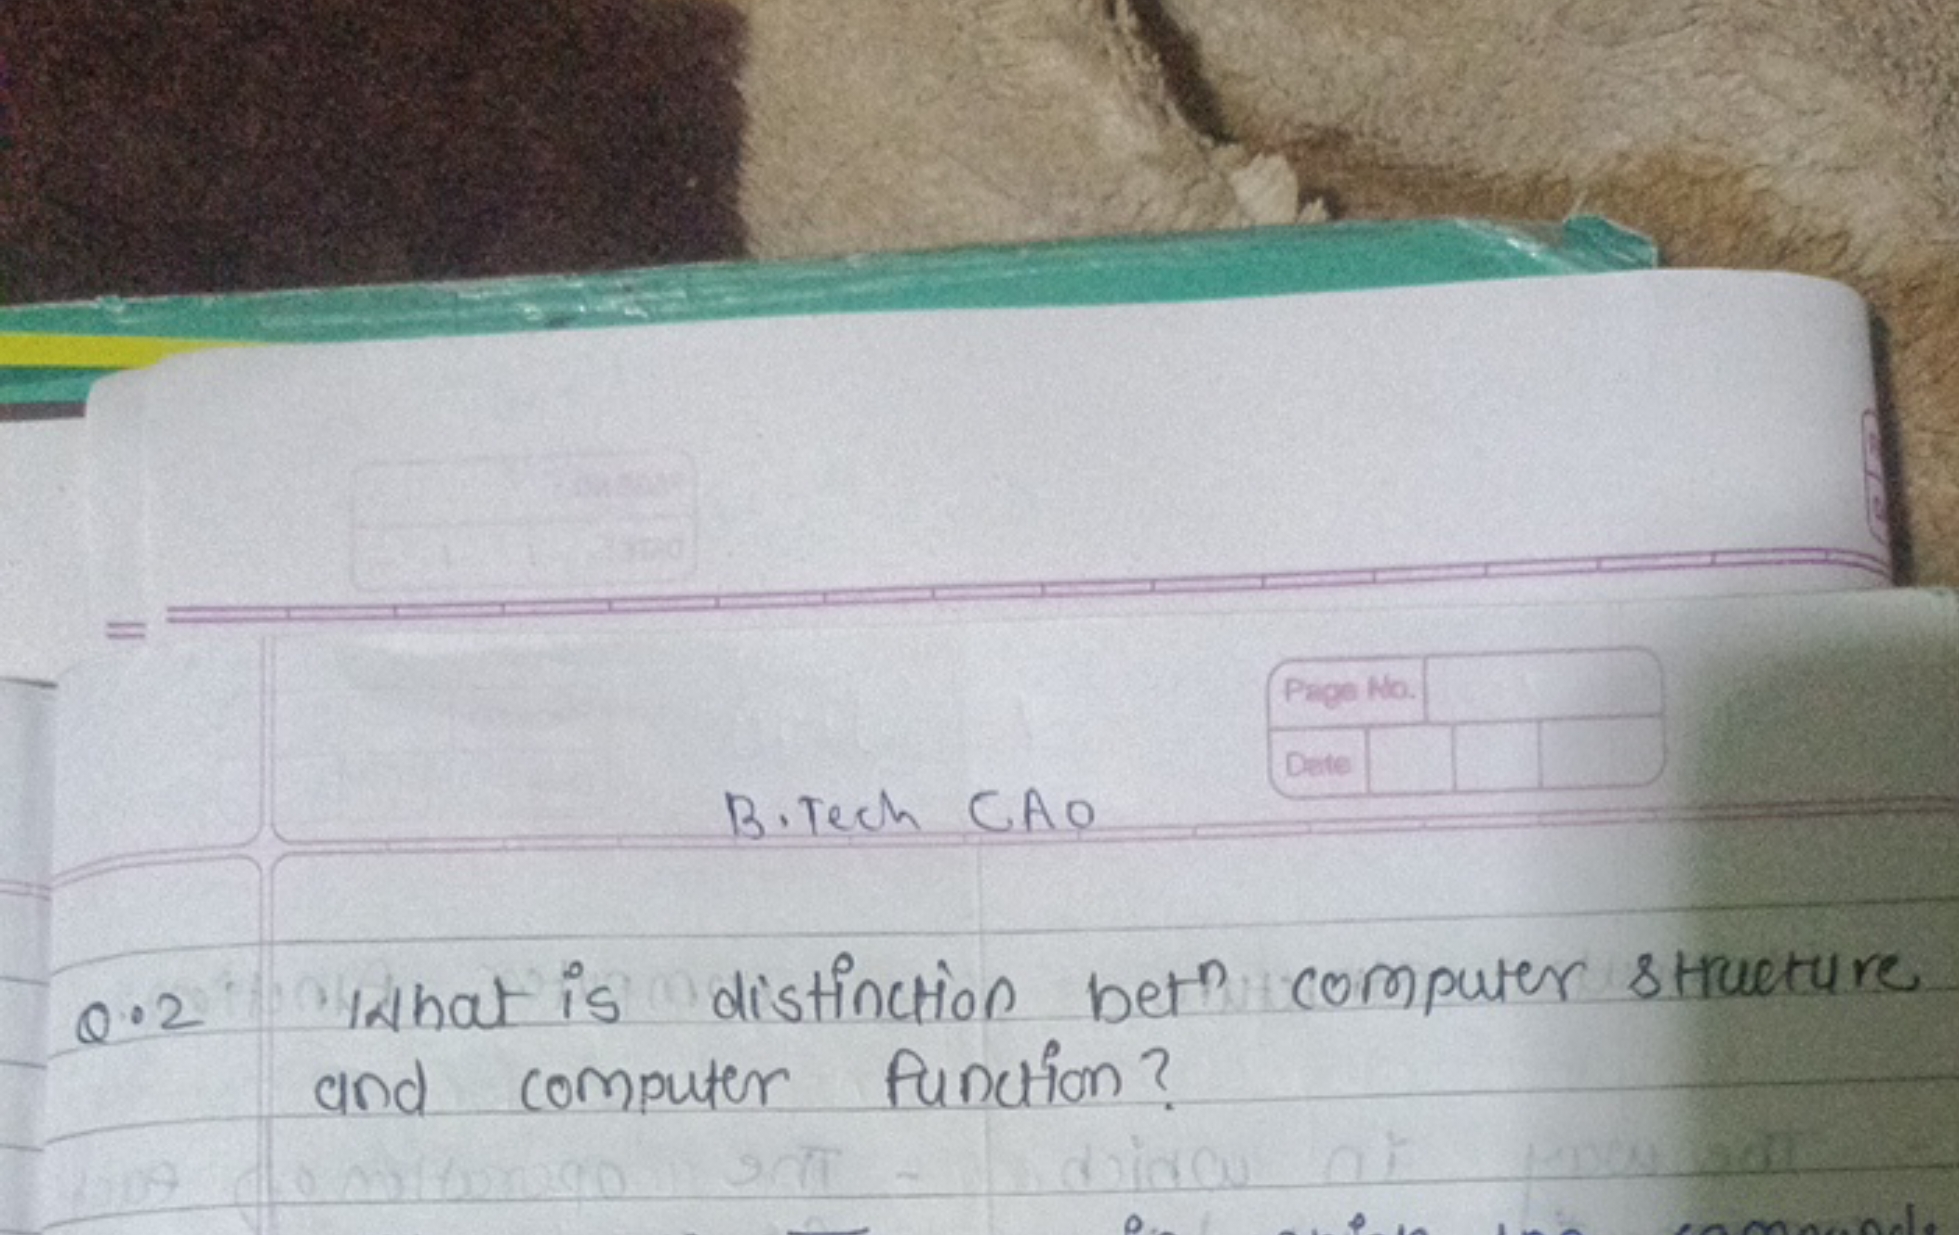 B. Tech CAO
Q. 2 What is distinction bet computer structure and comput